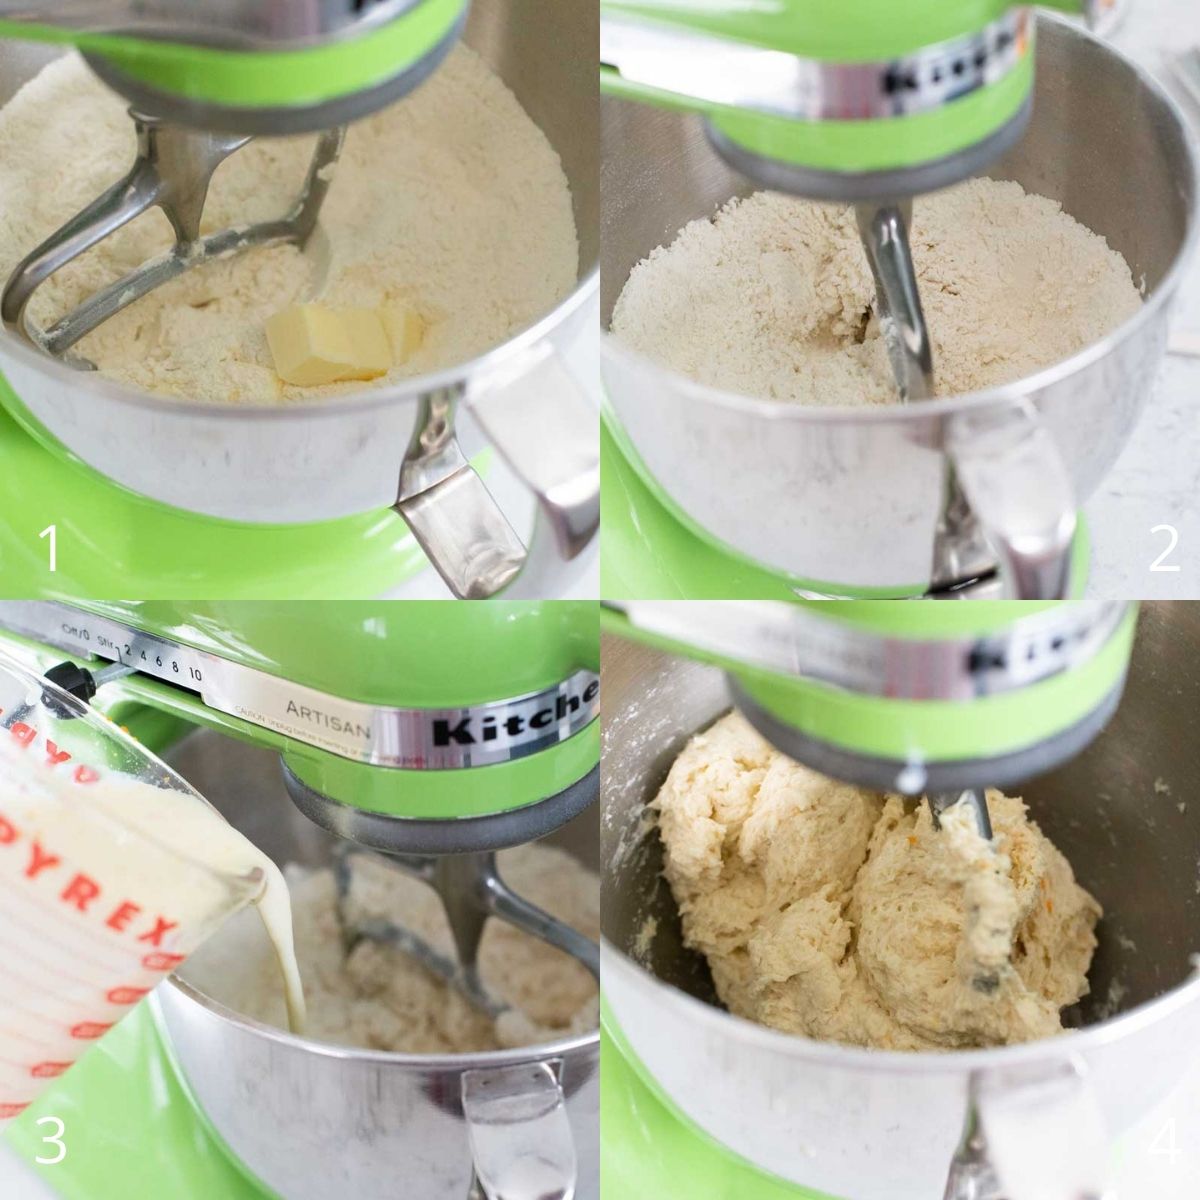 Step by Step photos show how to assemble the irish soda bread dough in a stand mixer.